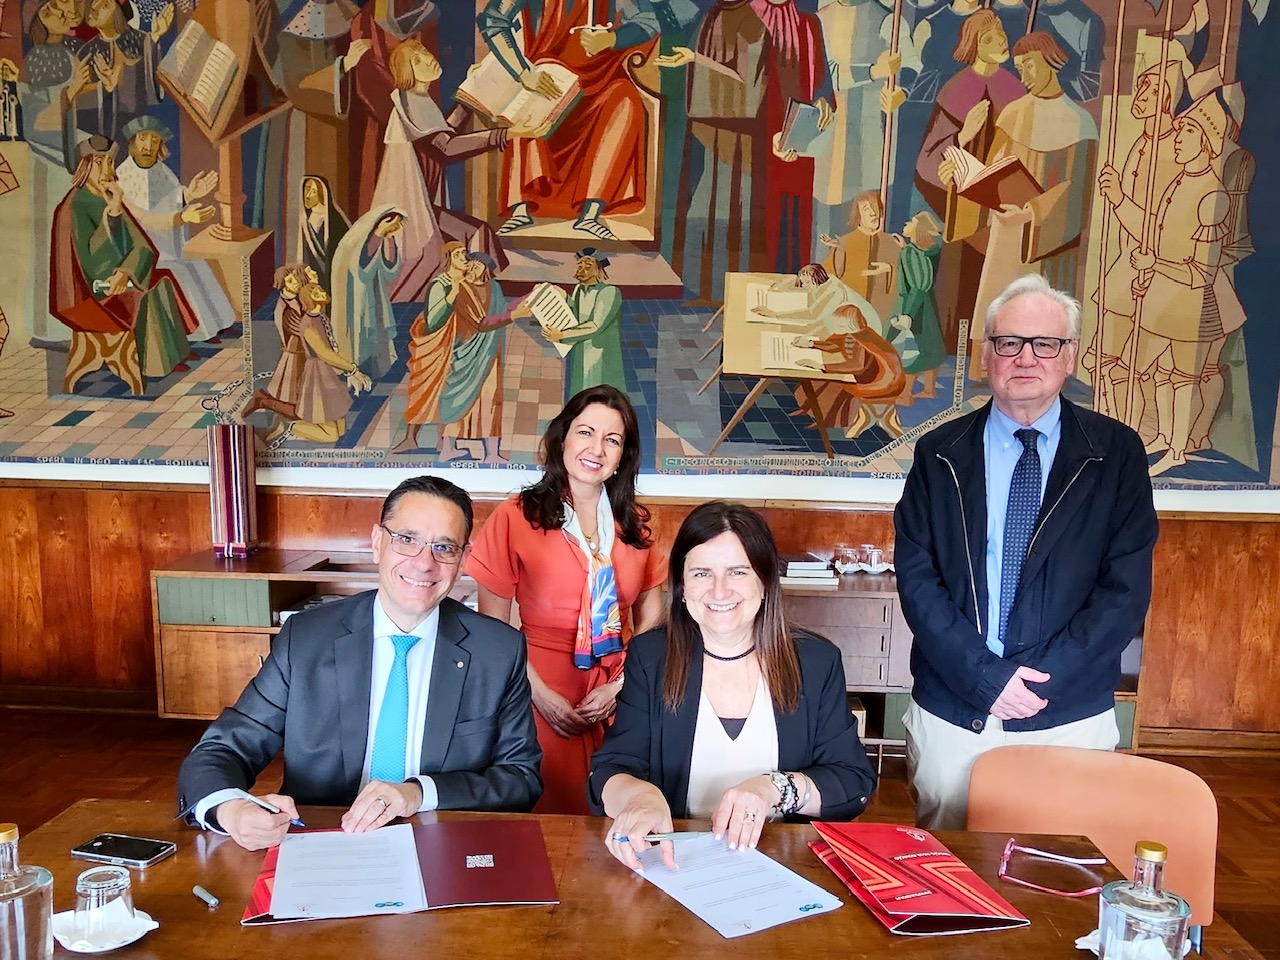 Signature of a cooperation agreement between the UIHJ and the Faculty of Law of the University of Lisbon (Portugal).